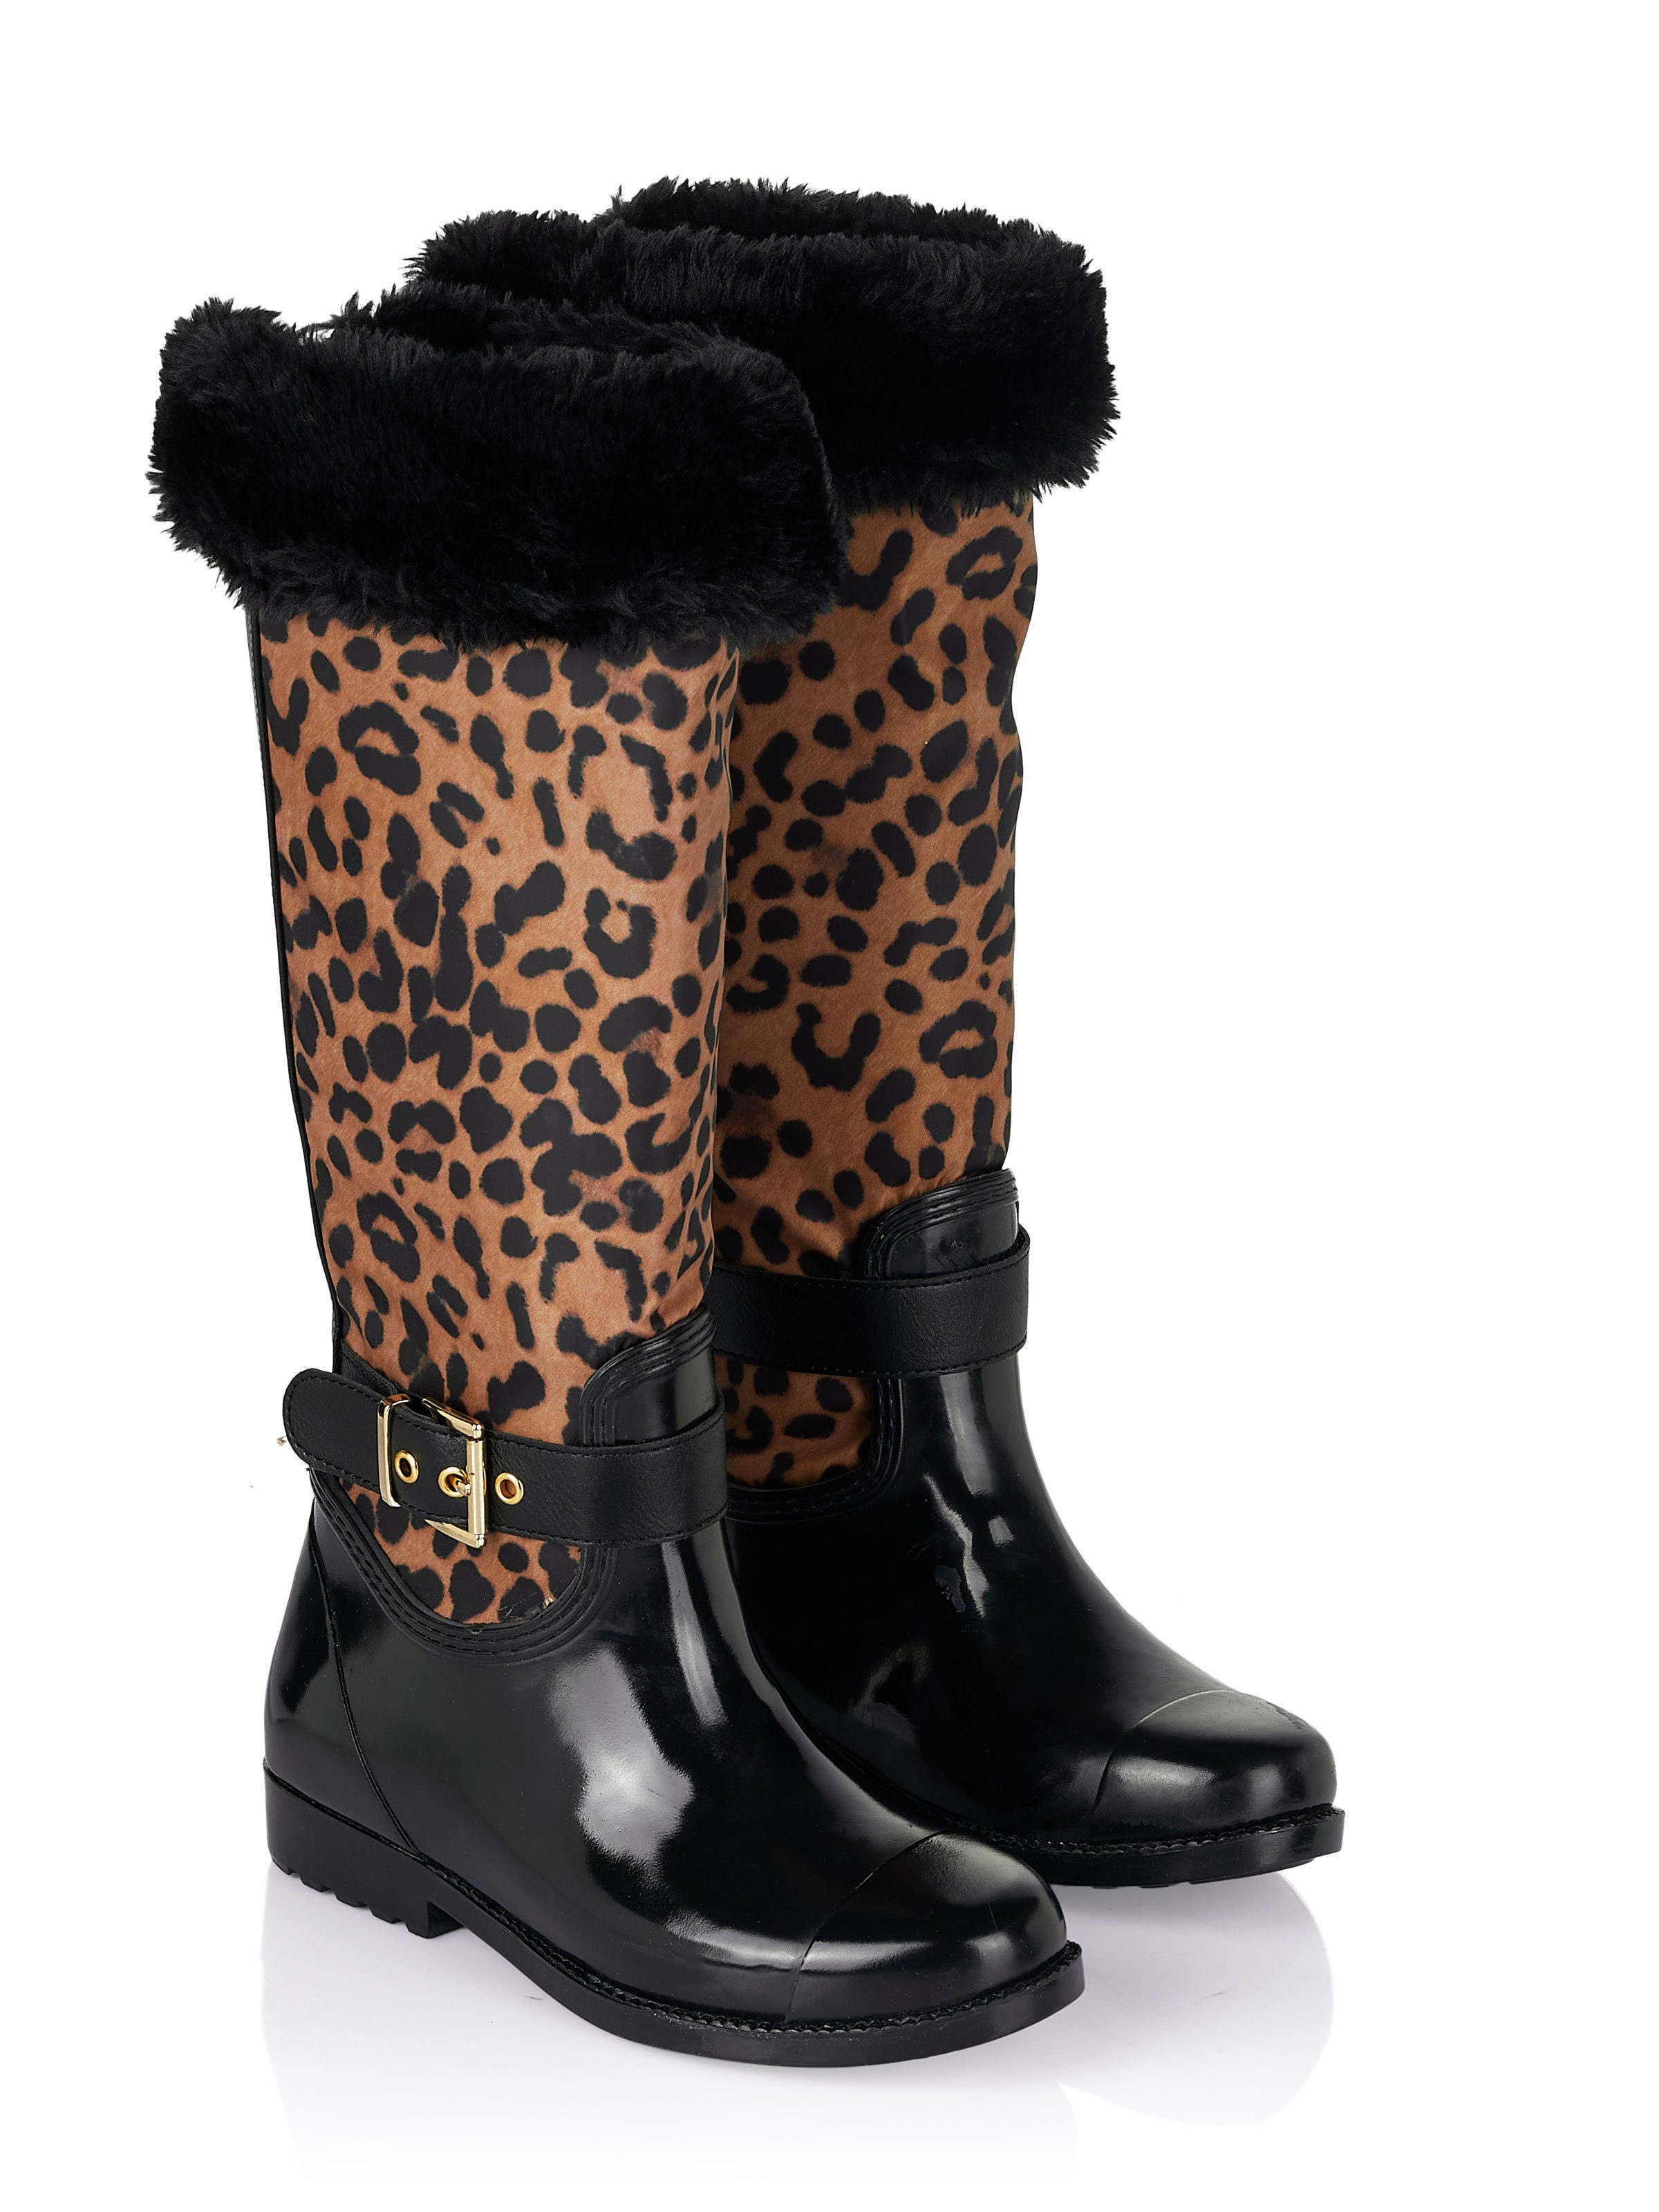 Guess GUESS Stiefel leopard Stiefel